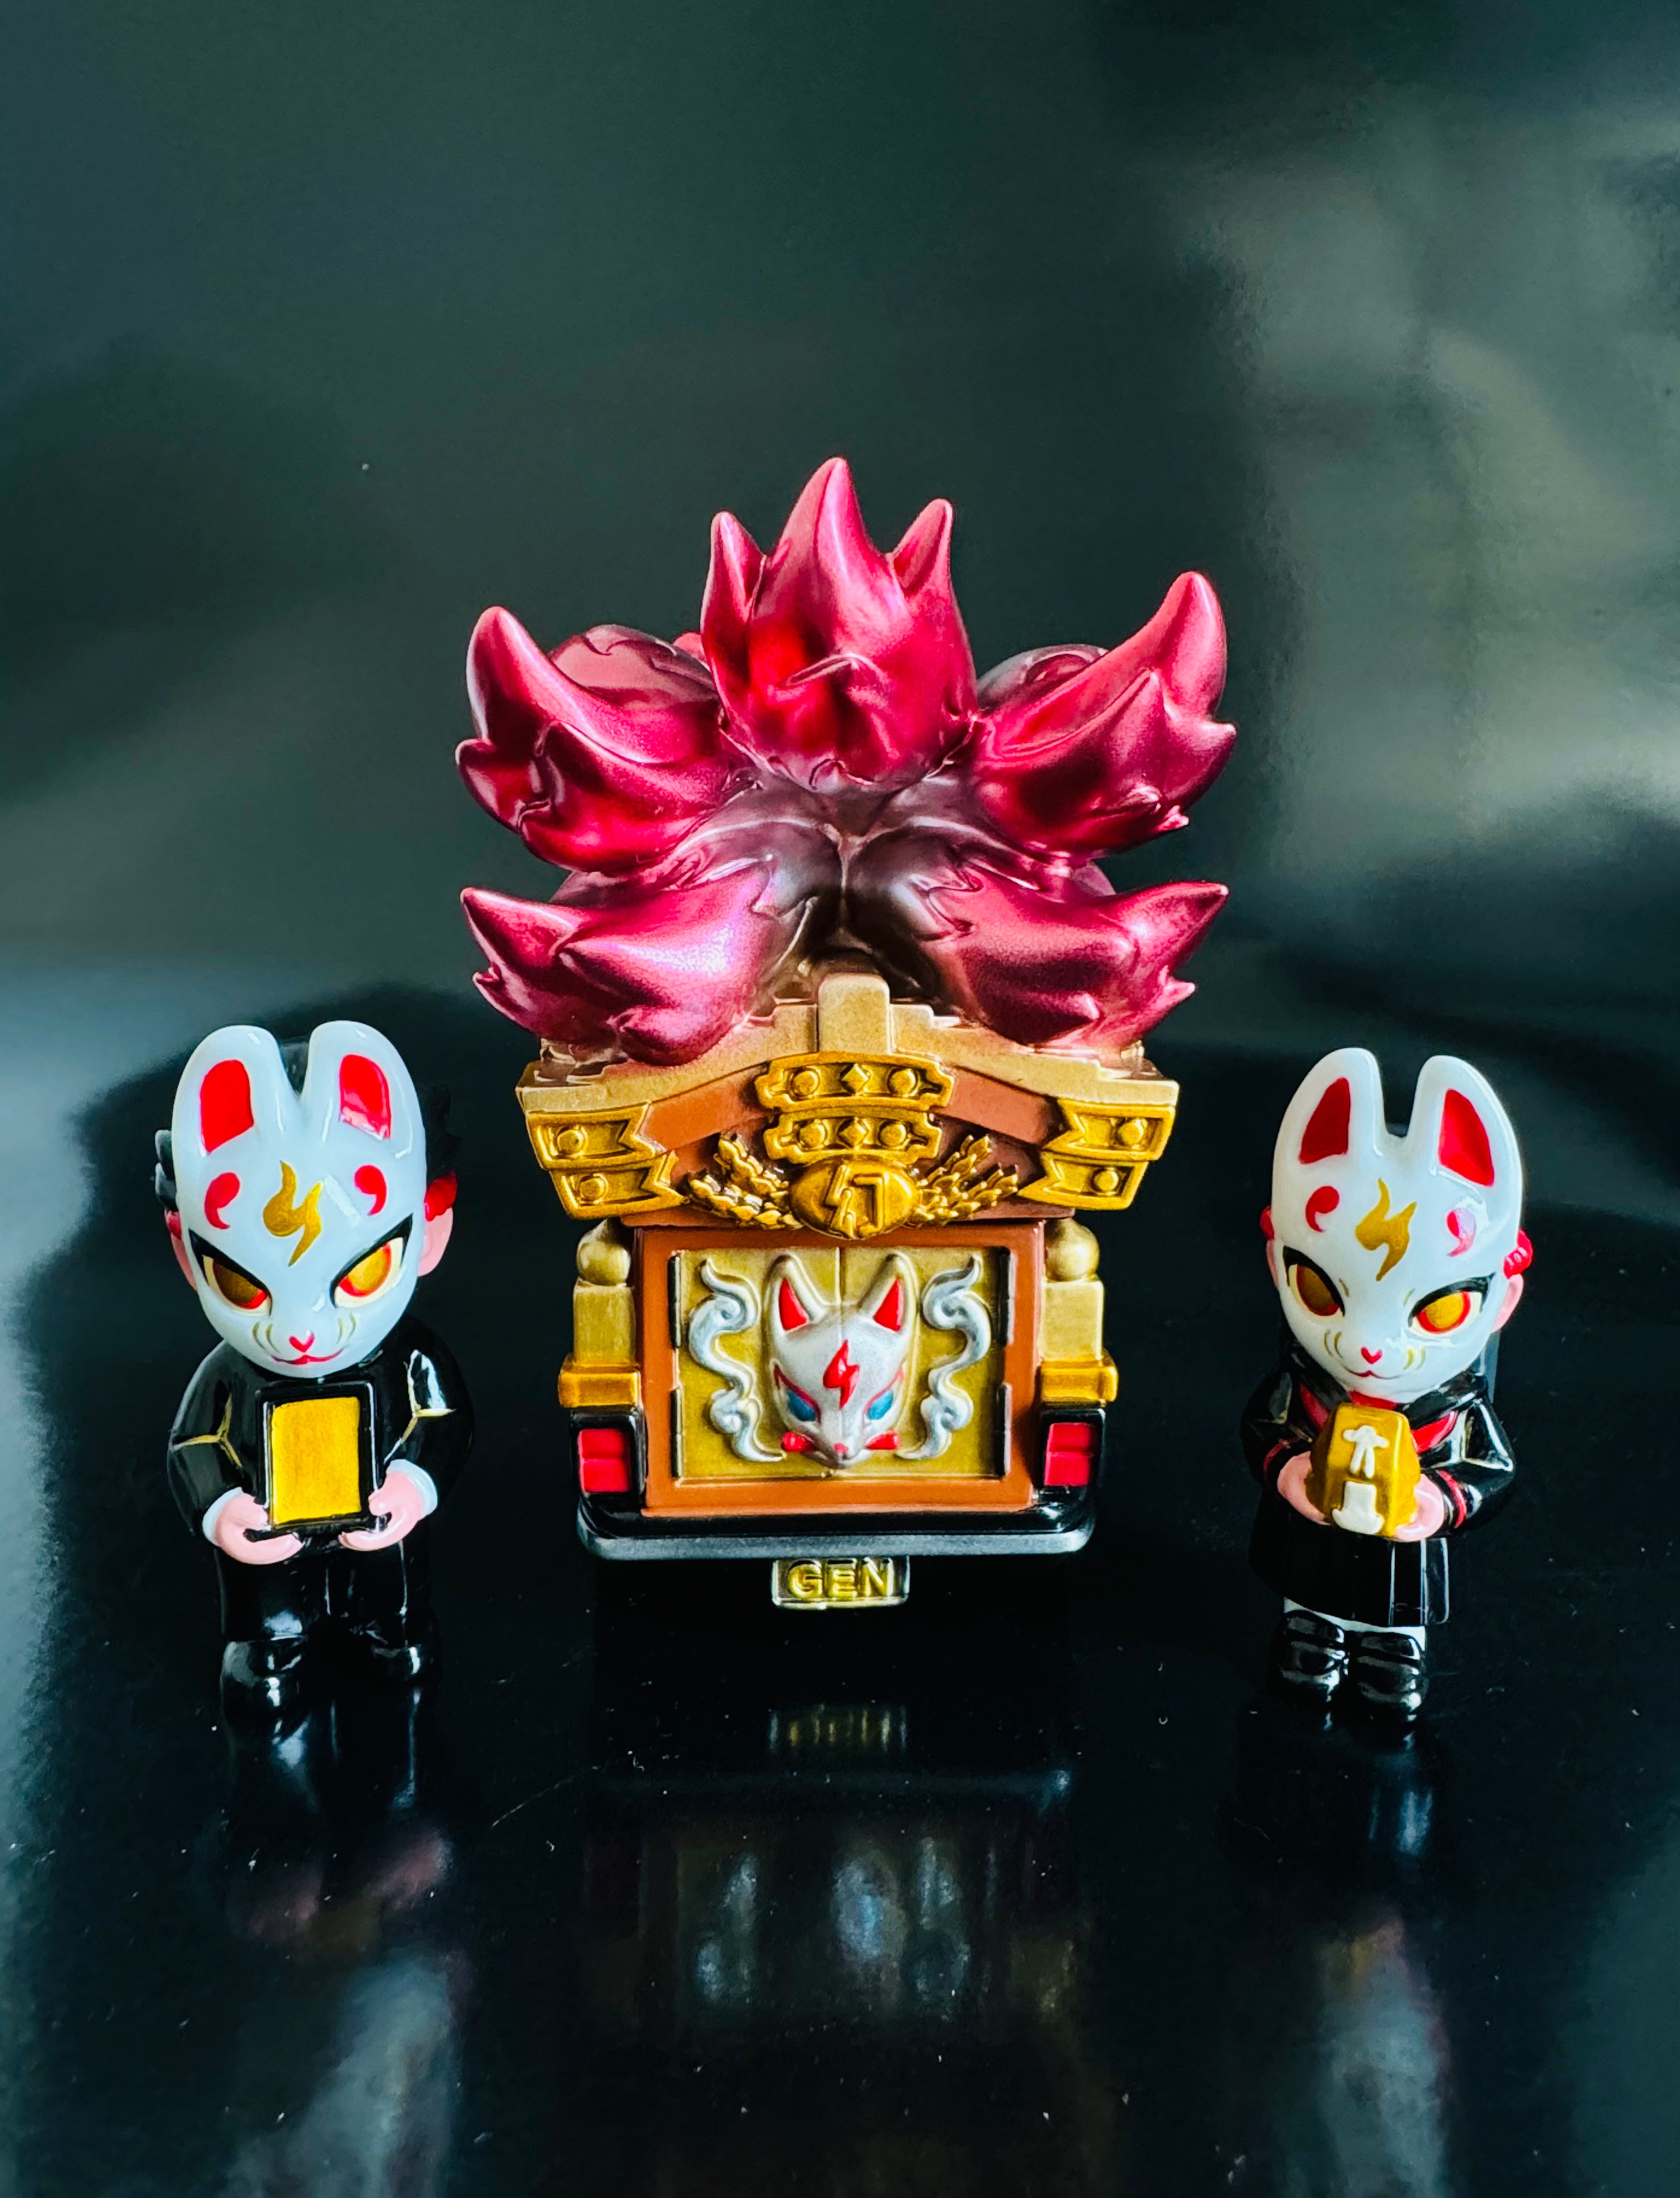 A blind box set from Strangecat Toys: The Genkosha Catafalque Set No 2 featuring a luxury car delivering a coffin, fox boy and girl figurines, and an openable coffin.